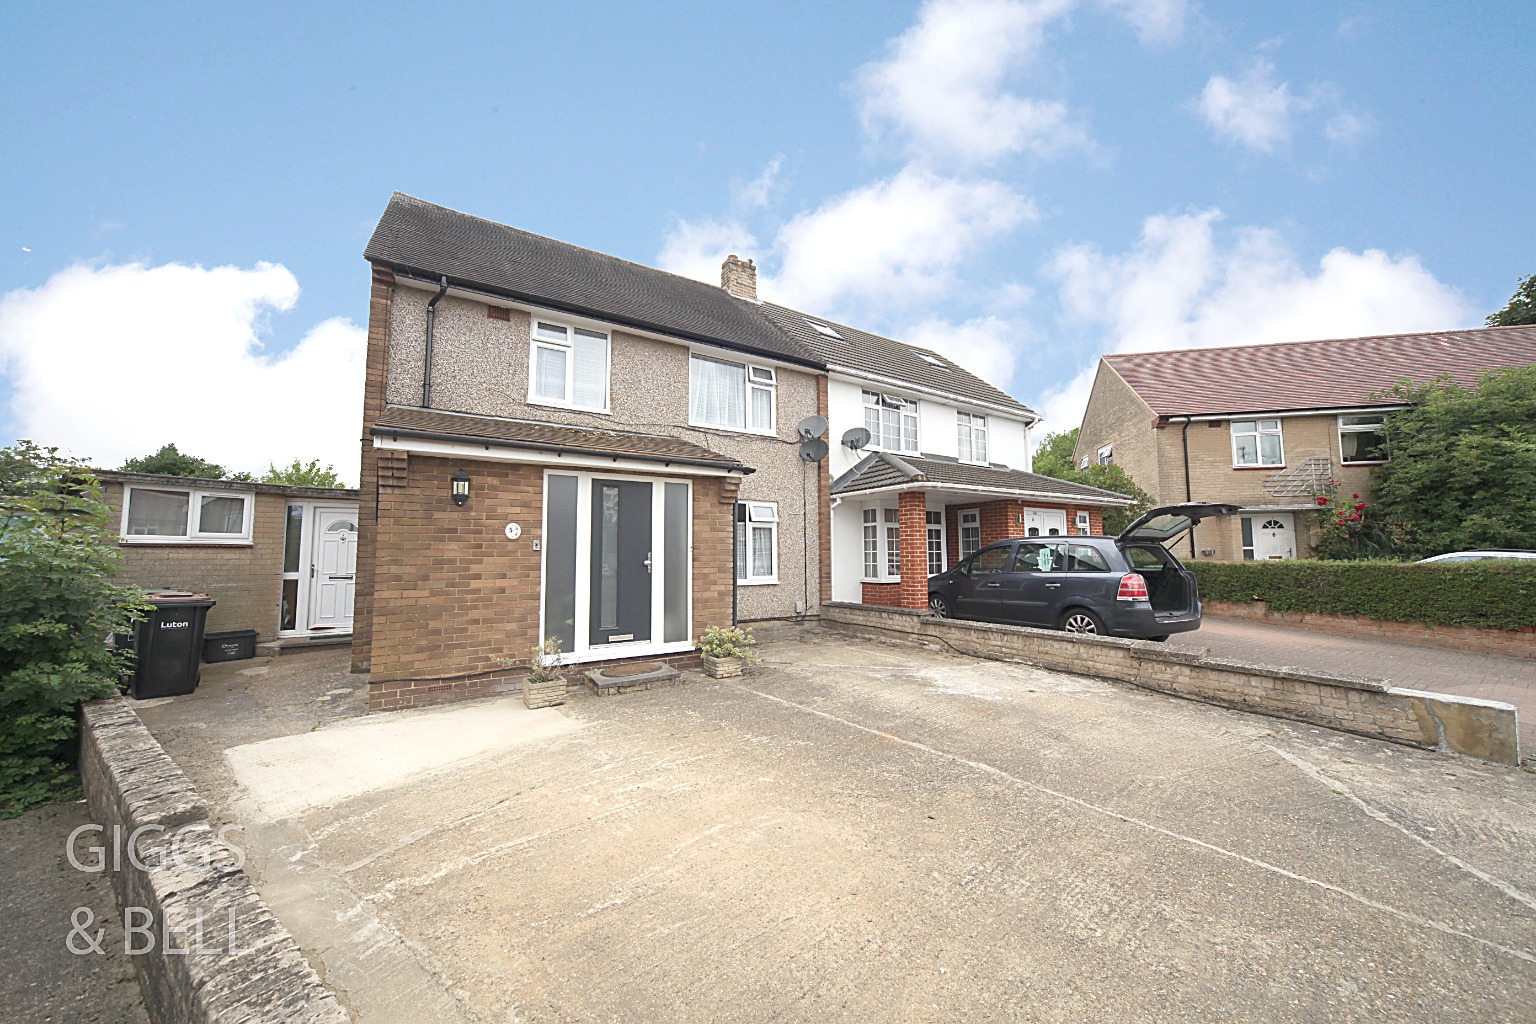 3 bed semi-detached house for sale in Hanswick Close, Luton - Property Image 1